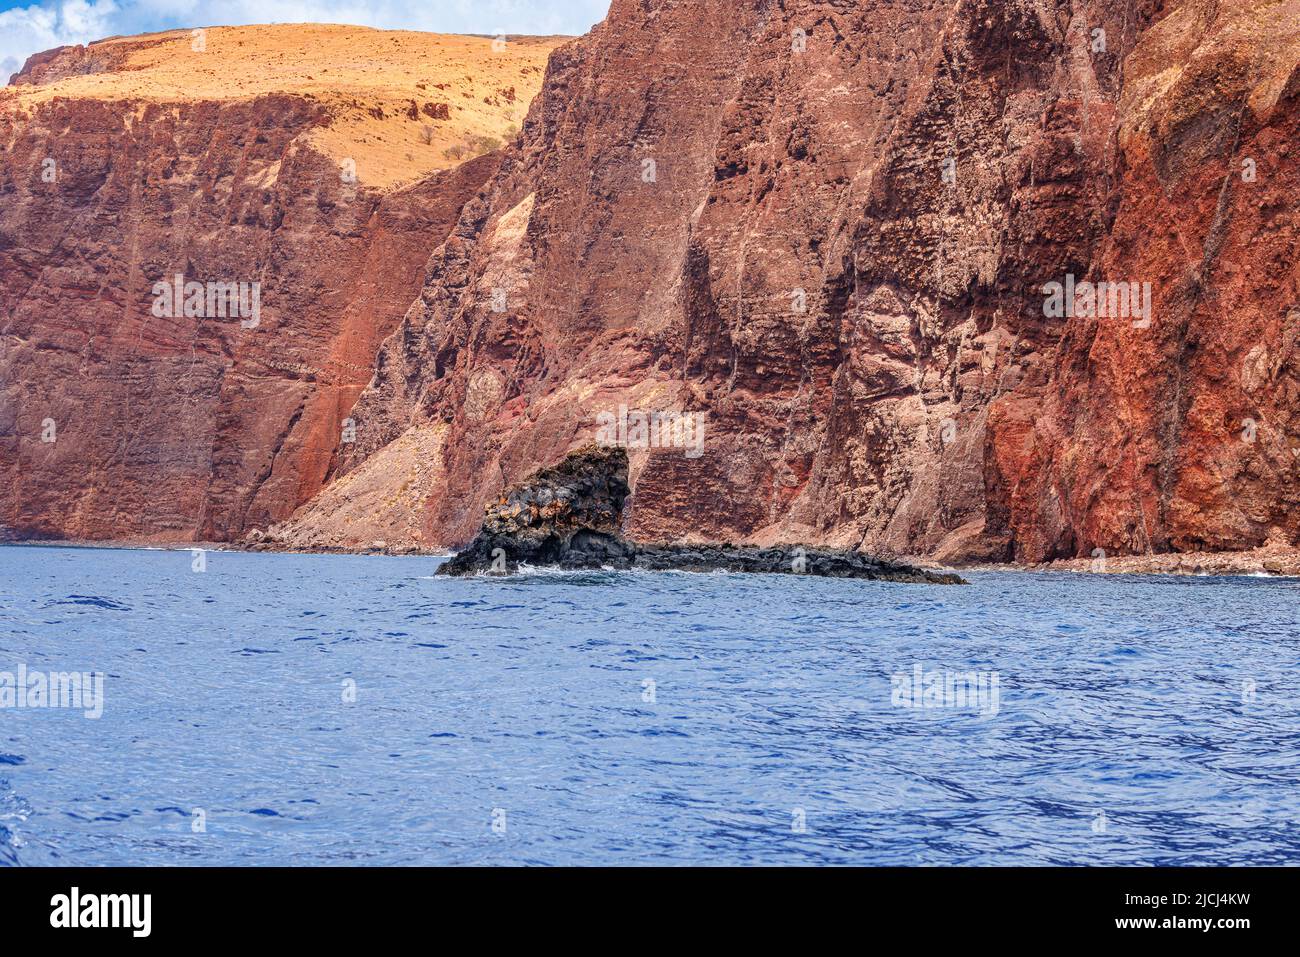 A view of Sharkfin Rock and the cliffs on the southwest side of the island of Lanai, Hawaii, USA. Stock Photo